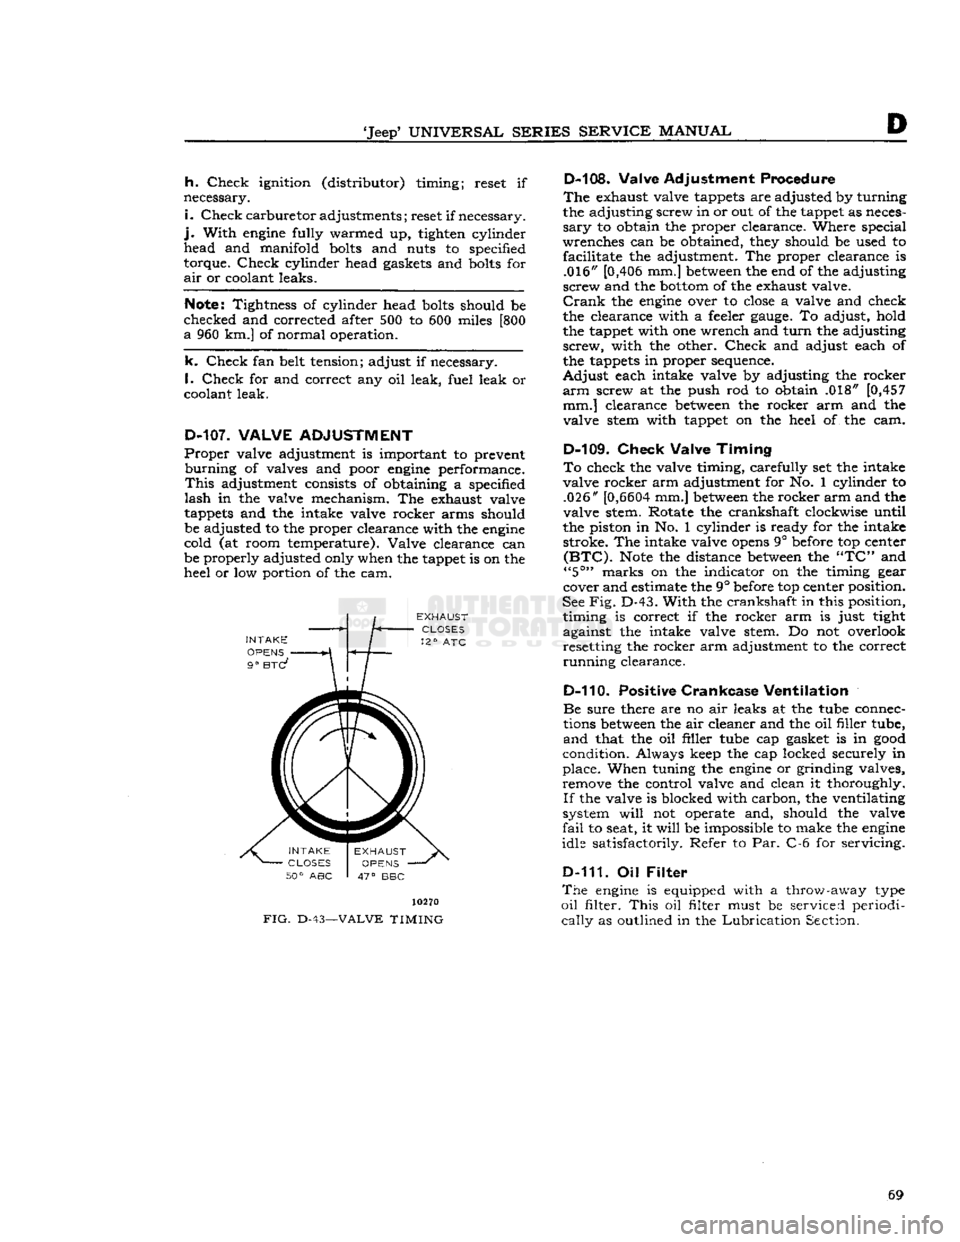 JEEP DJ 1953 User Guide 
Jeep9
 UNIVERSAL
 SERIES
 SERVICE
 MANUAL 

h.
 Check
 ignition (distributor) timing; reset if 
necessary. 

i.
 Check
 carburetor
 adjustments; reset if necessary, 

j.
 With
 engine
 fully warmed 